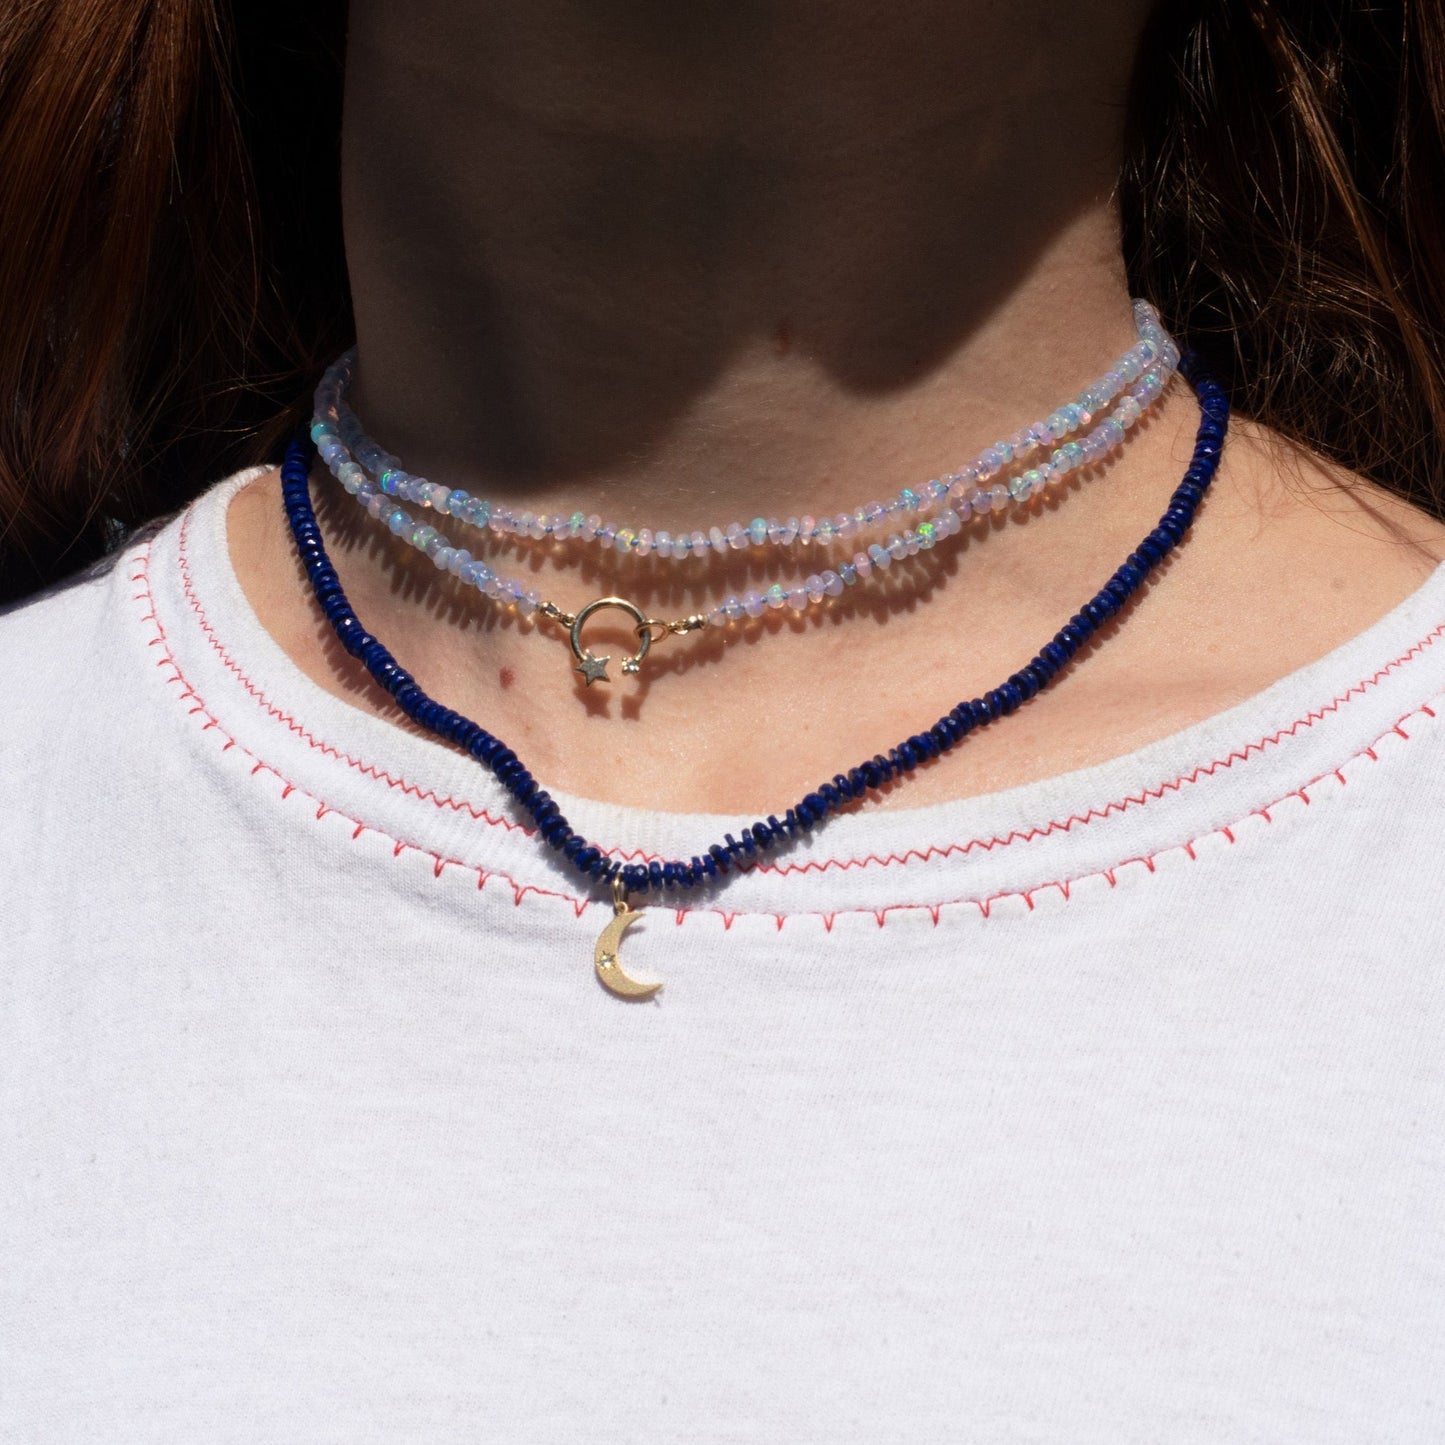 Lapis Tire Beaded Necklace With Crescent Charm